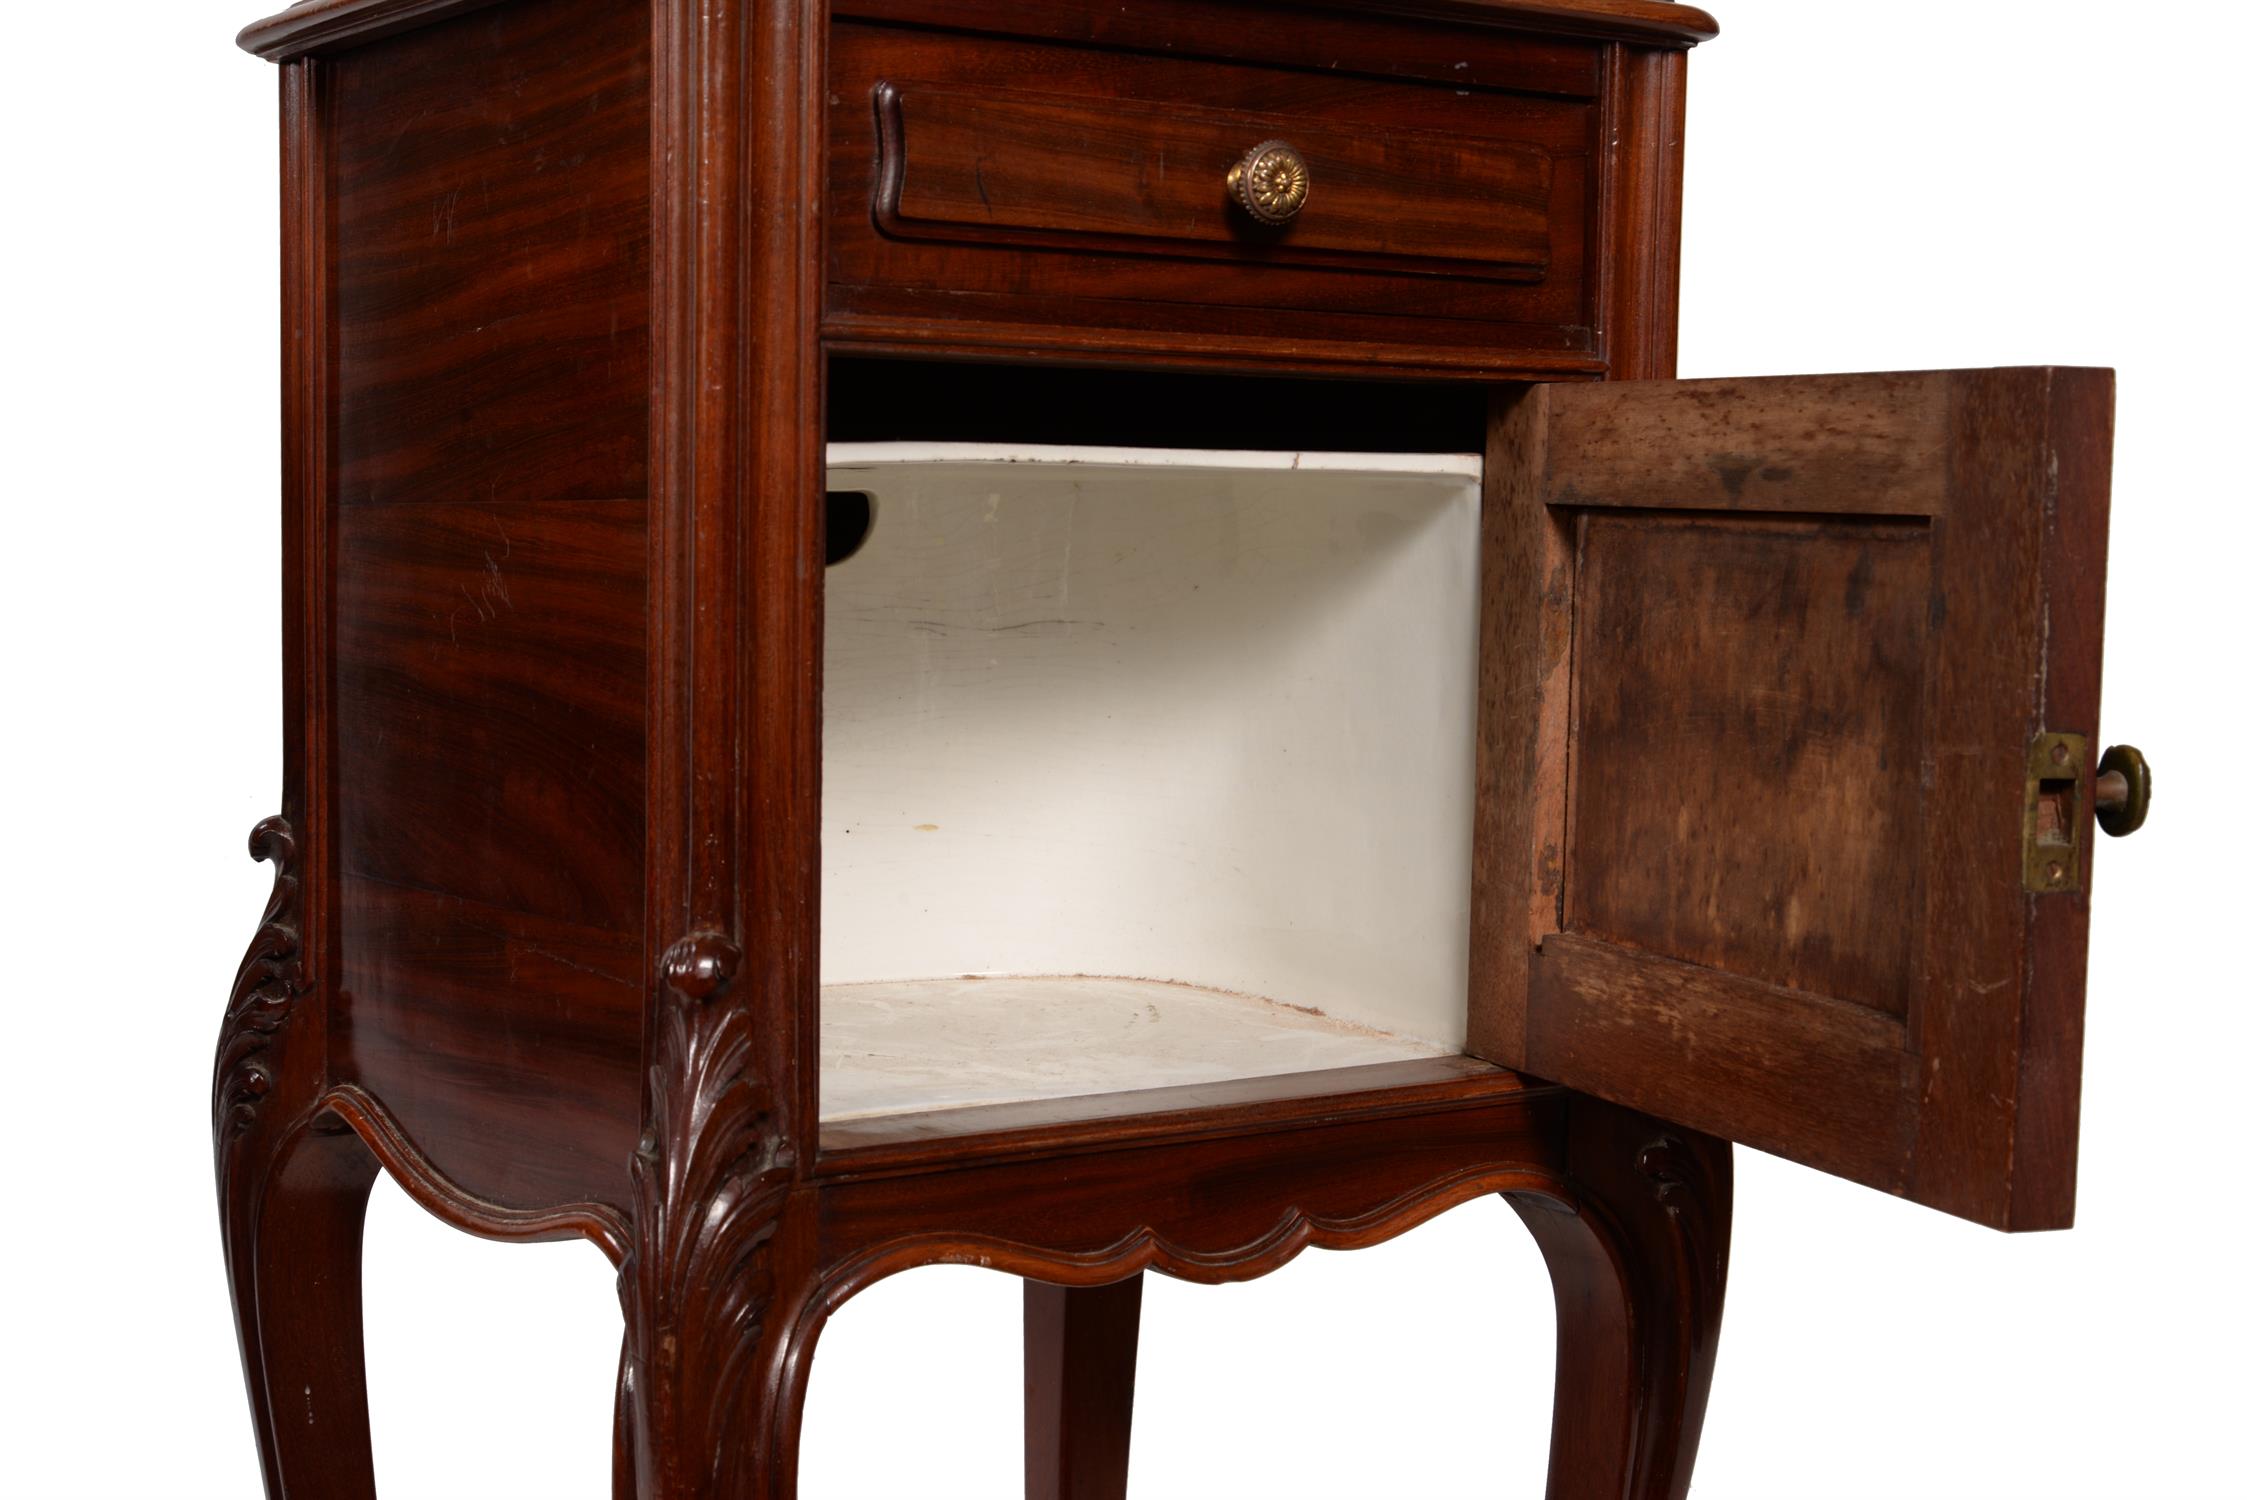 A pair of French mahogany bedside cabinets, late 19th/early 20th century - Image 3 of 3